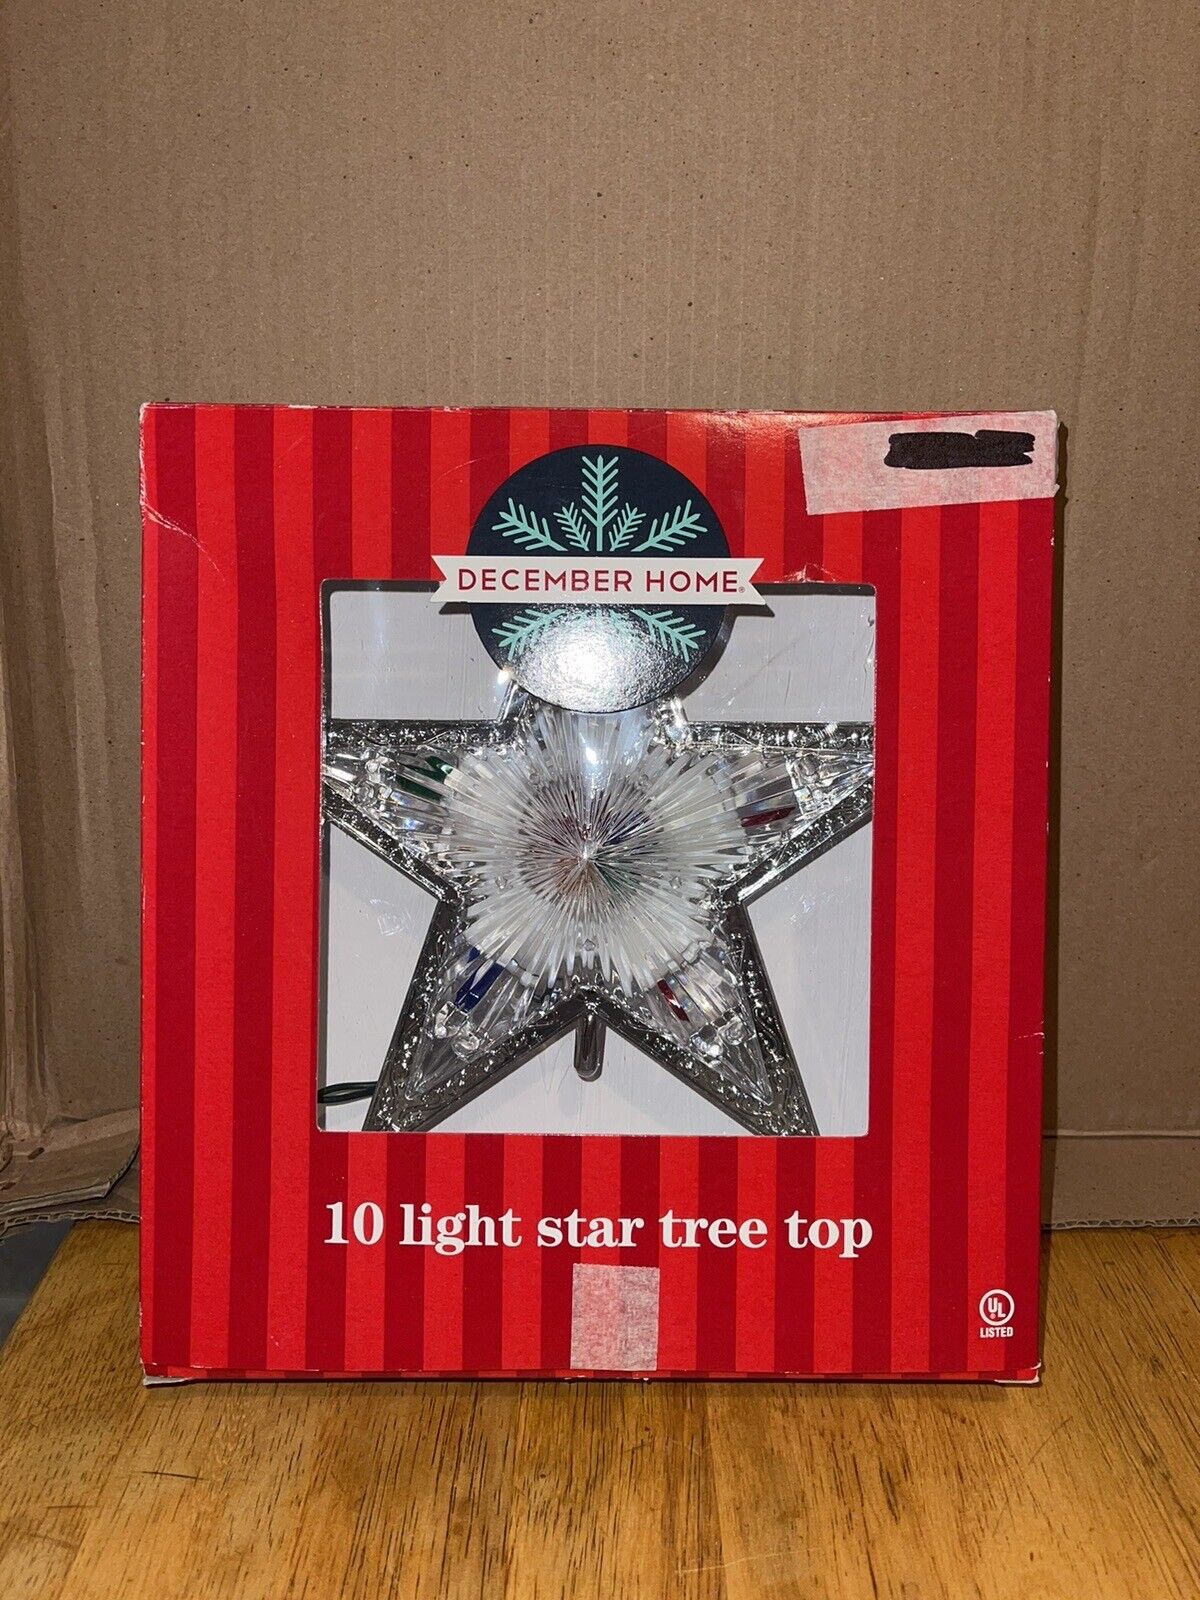 Vintage December Home Christmas Lighted Tree top Topper W Box